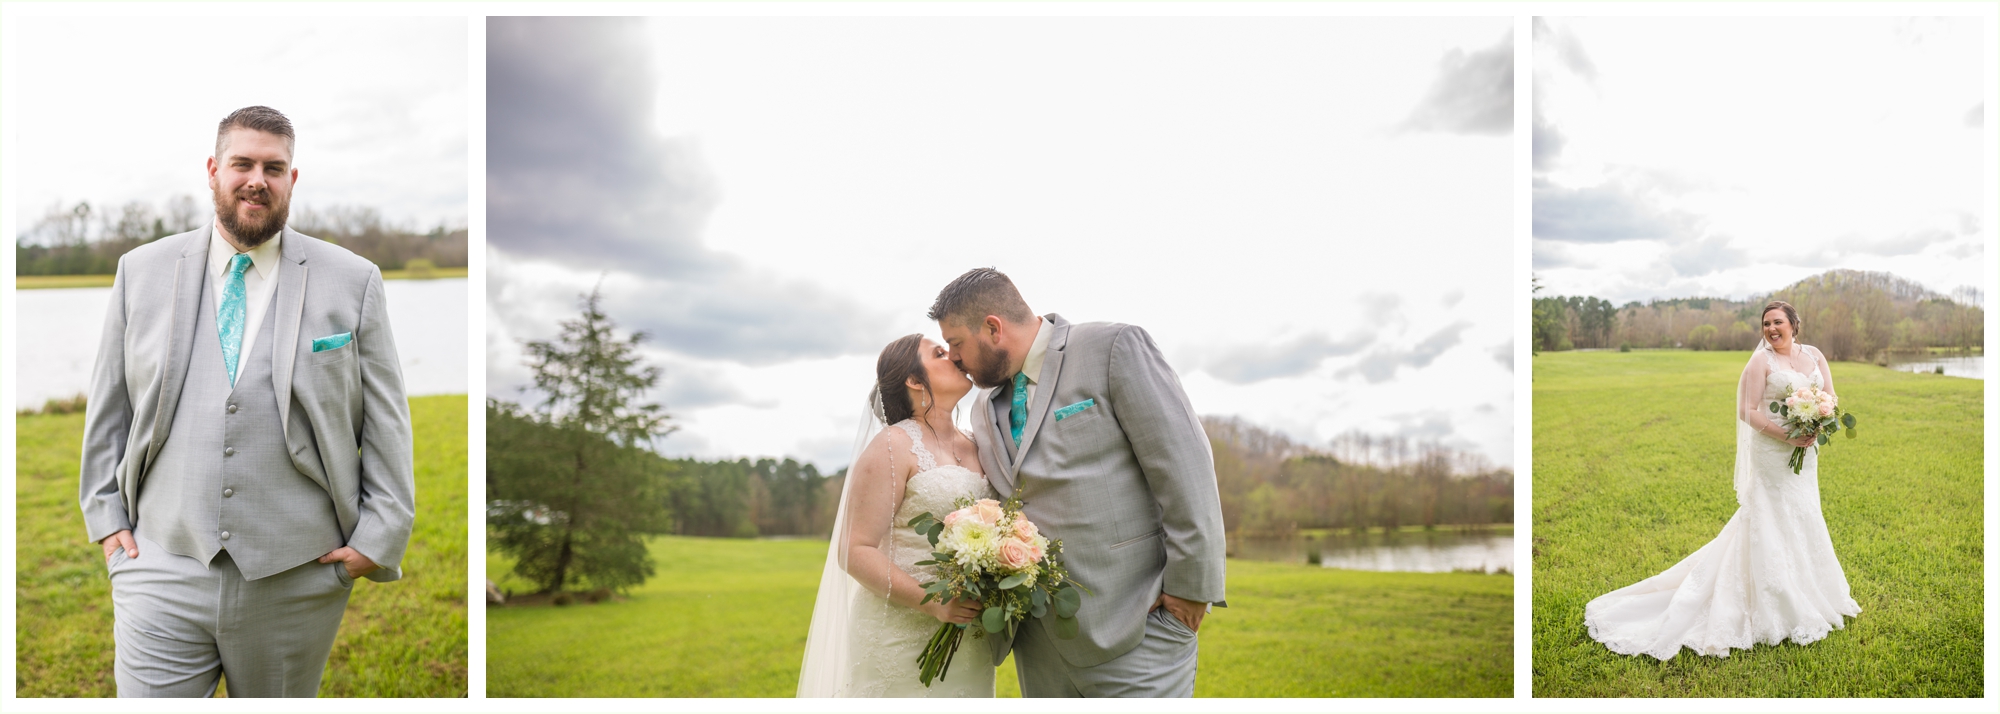 beautiful bride and groom portraits at spring lake events wedding in Georgia